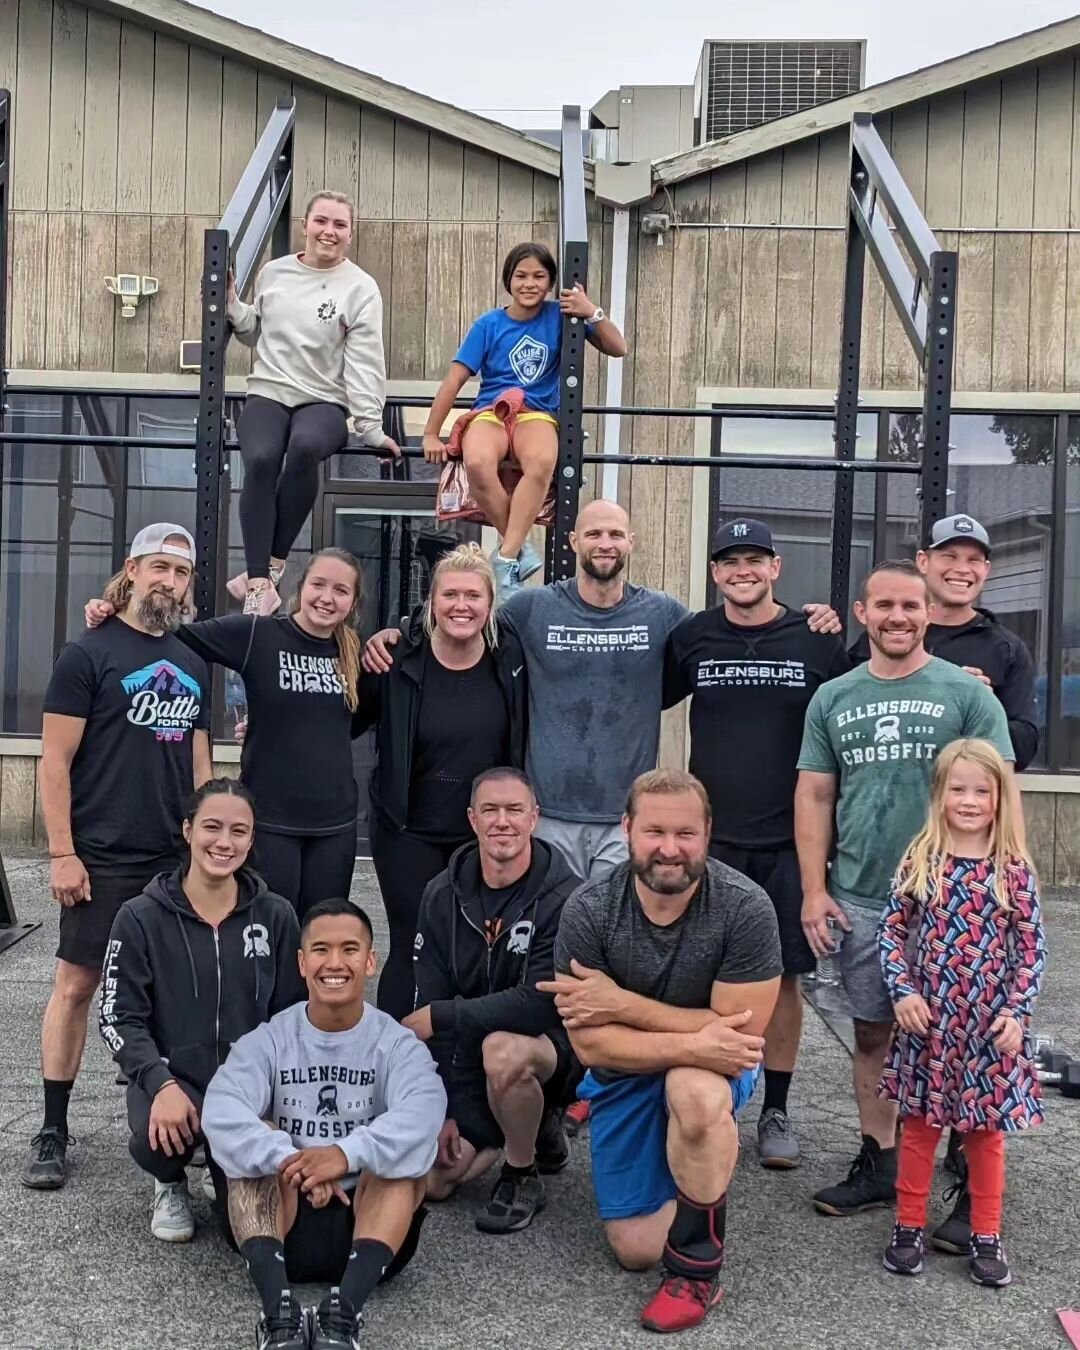 What a blast yesterday at the @battleforthe509 !! ECF showed up ready to get after it! Huge thanks to @doubledowncrossfit for hosting such a great event👍🏼